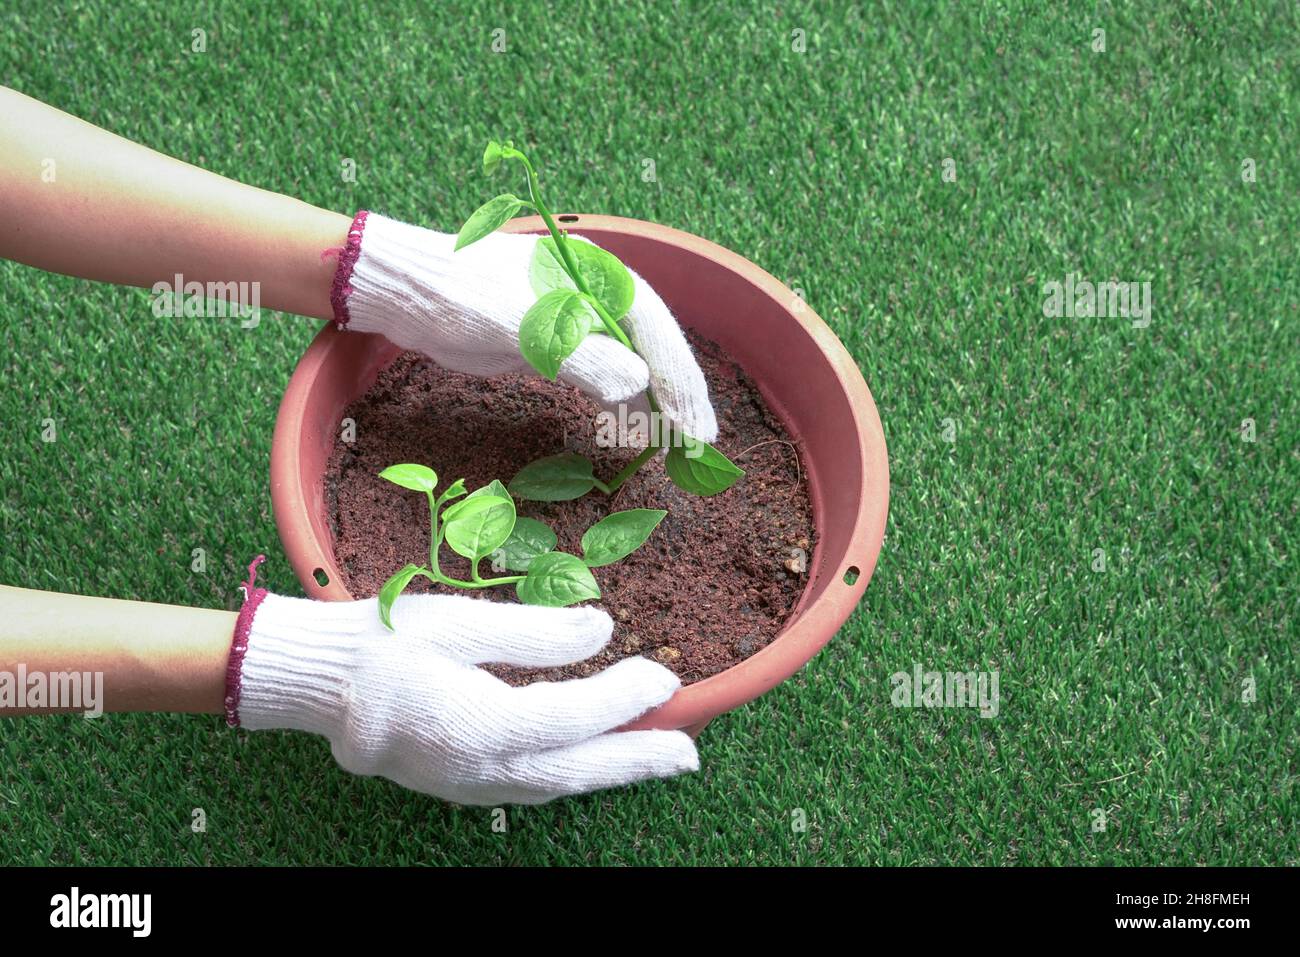 Woman gardener planting vegetables in a pot. Healthy living concept. Top view. Stock Photo